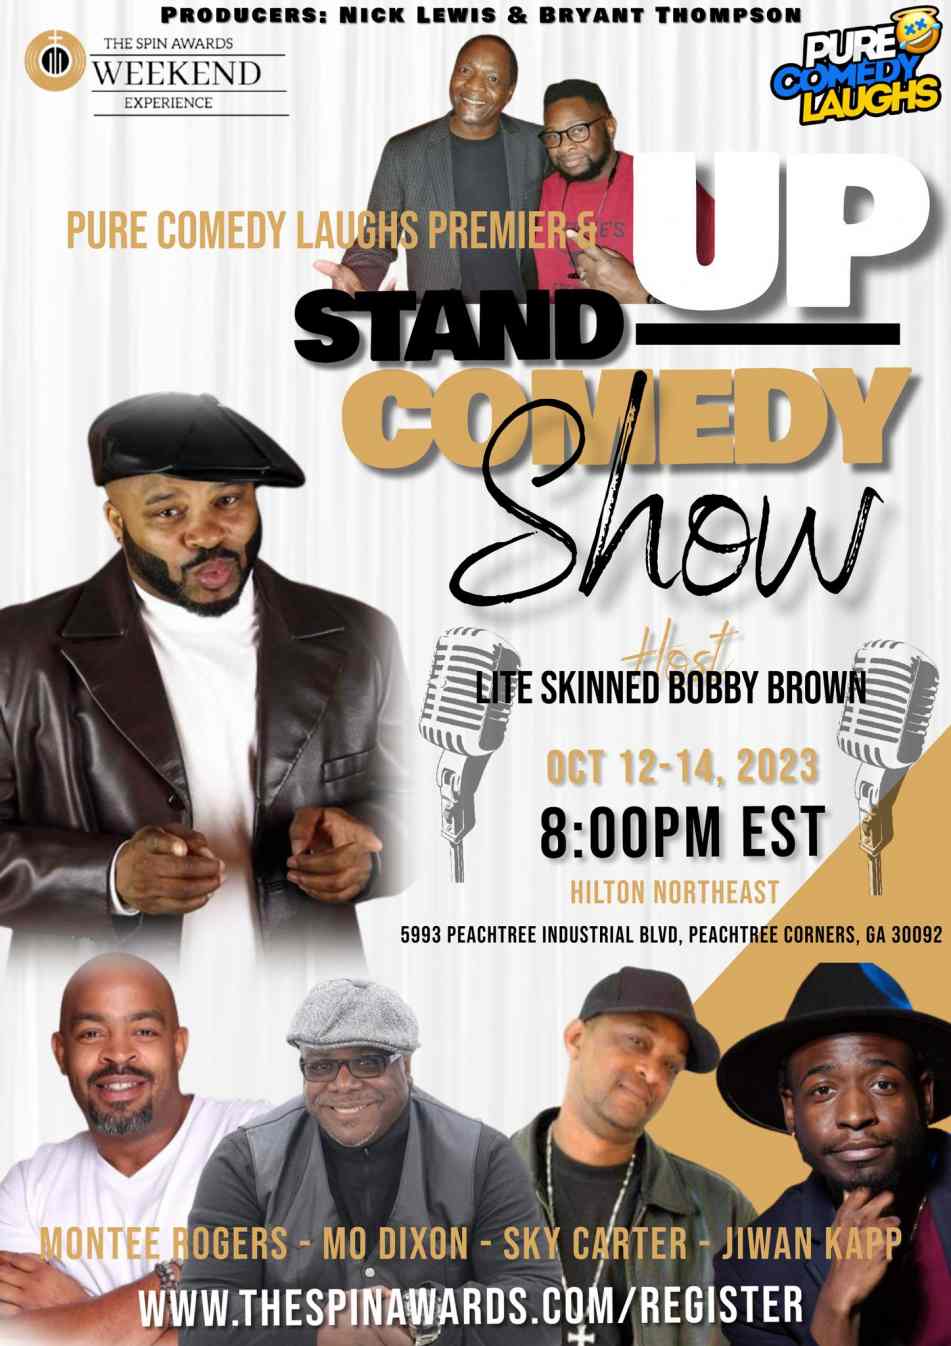 Pure Comedy Laughs series premier celebration to kickoff at the 2023